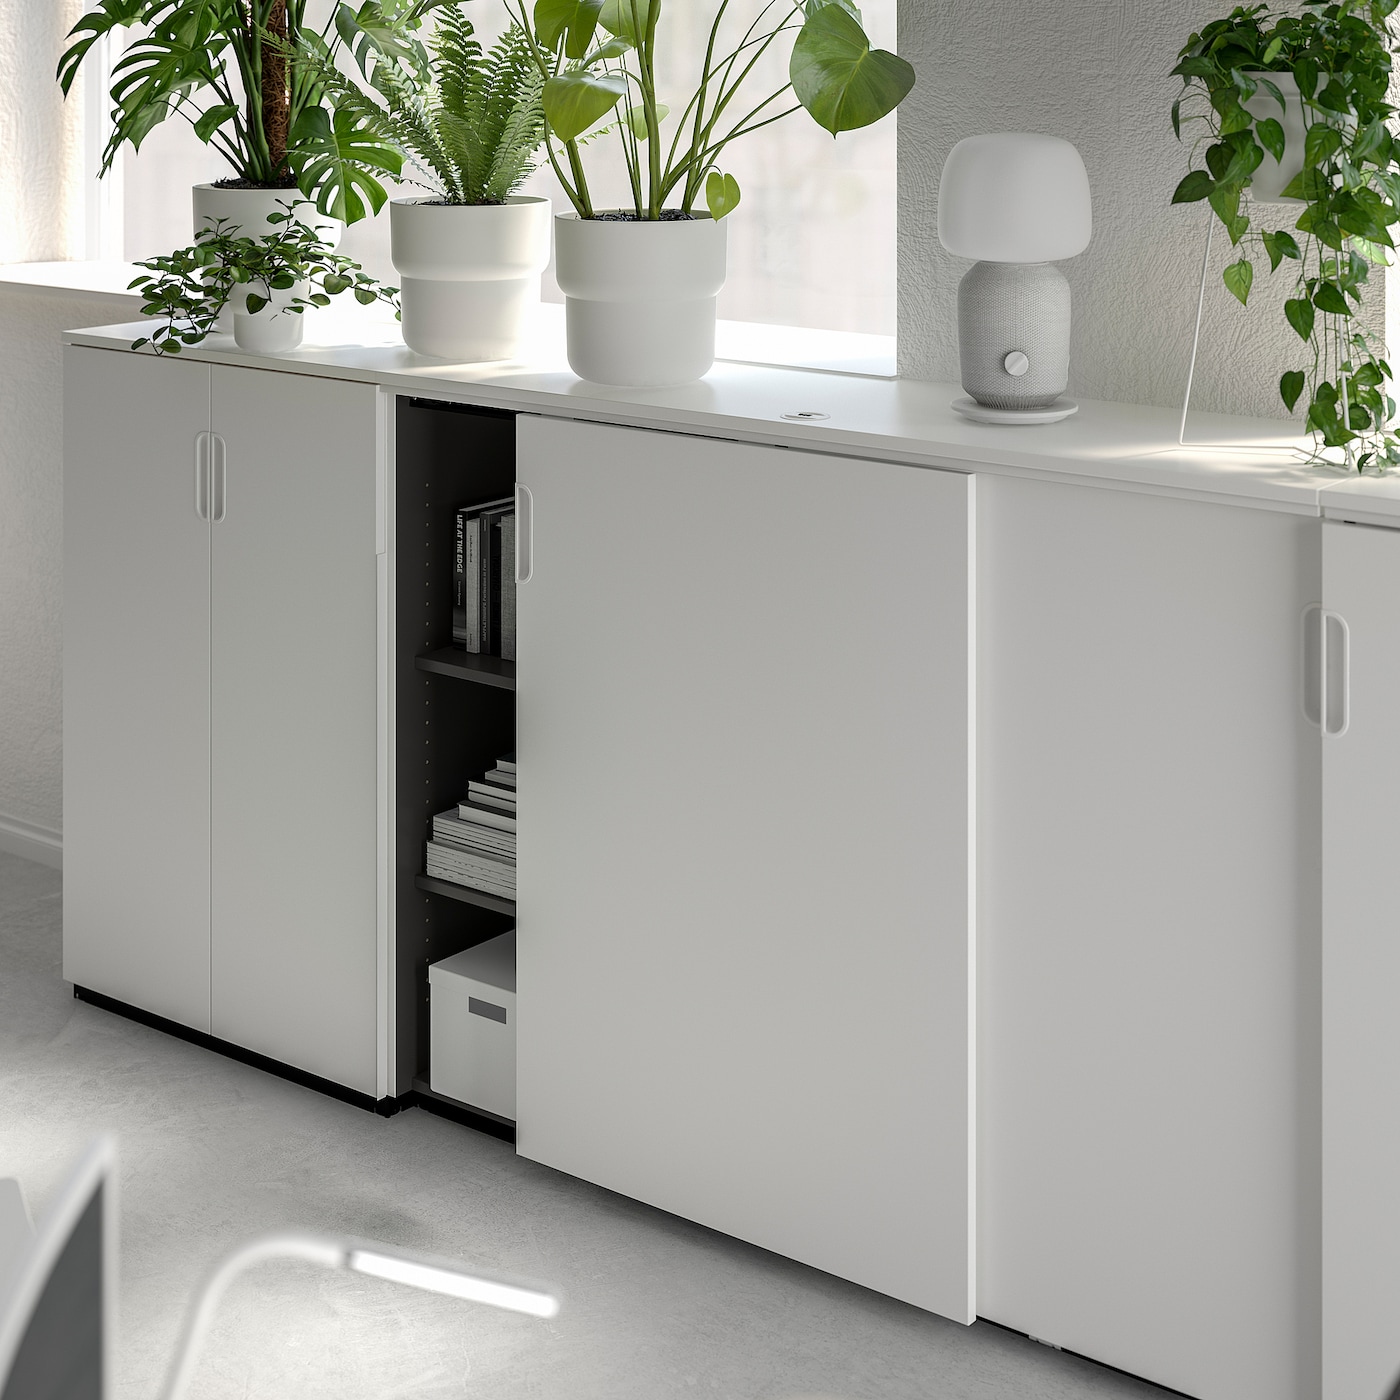 GALANT cabinet with doors white - IKEA